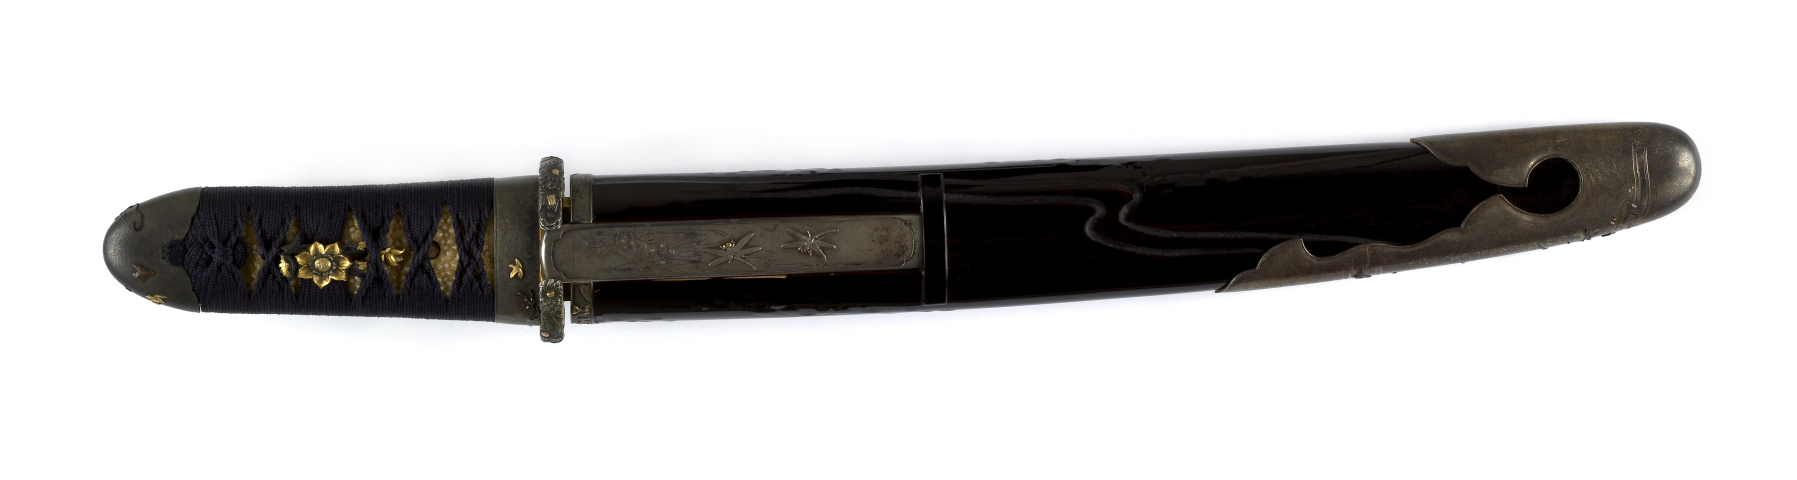 Image for Dagger (hamidashi) with black lacquer saya with waves. (includes 51.1282.1-51.2282.2)